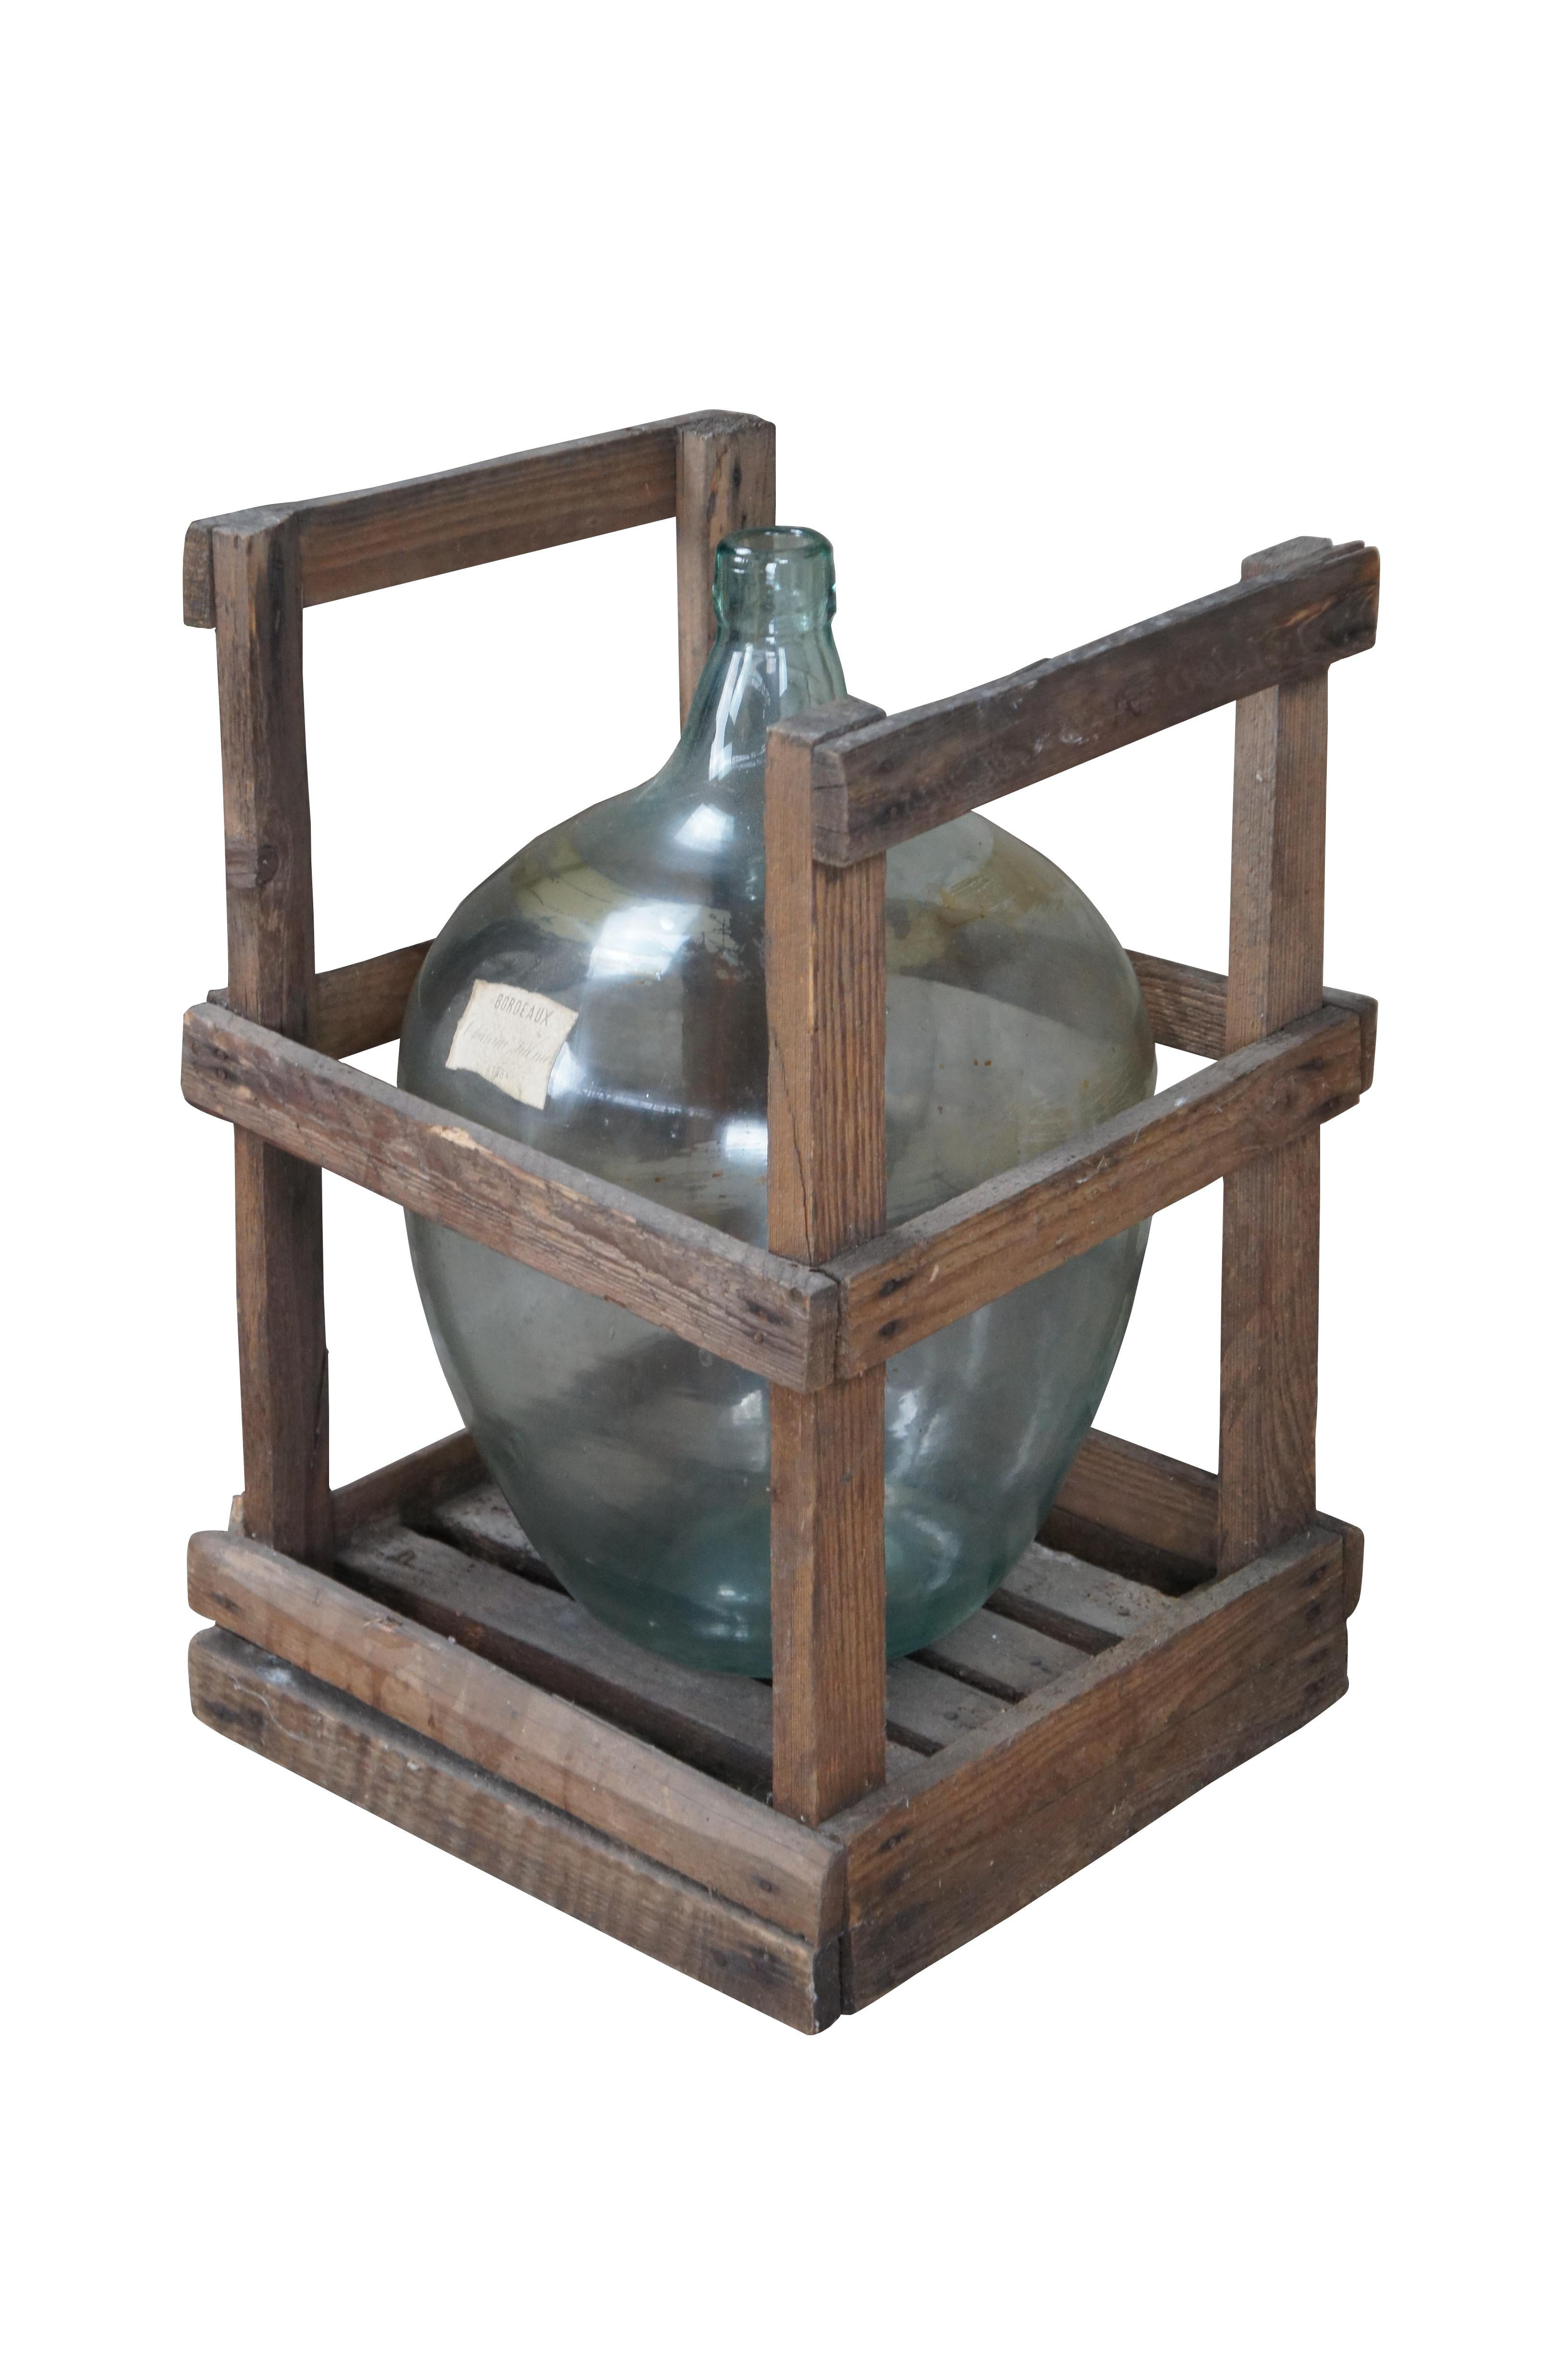 Antique French Hand Blown Glass Demijohn Bordeaux Wine Bottle Jug & Wood Crate. Features a pale green form and crate crafted from oak. Marked 1884

Dimensions:
15